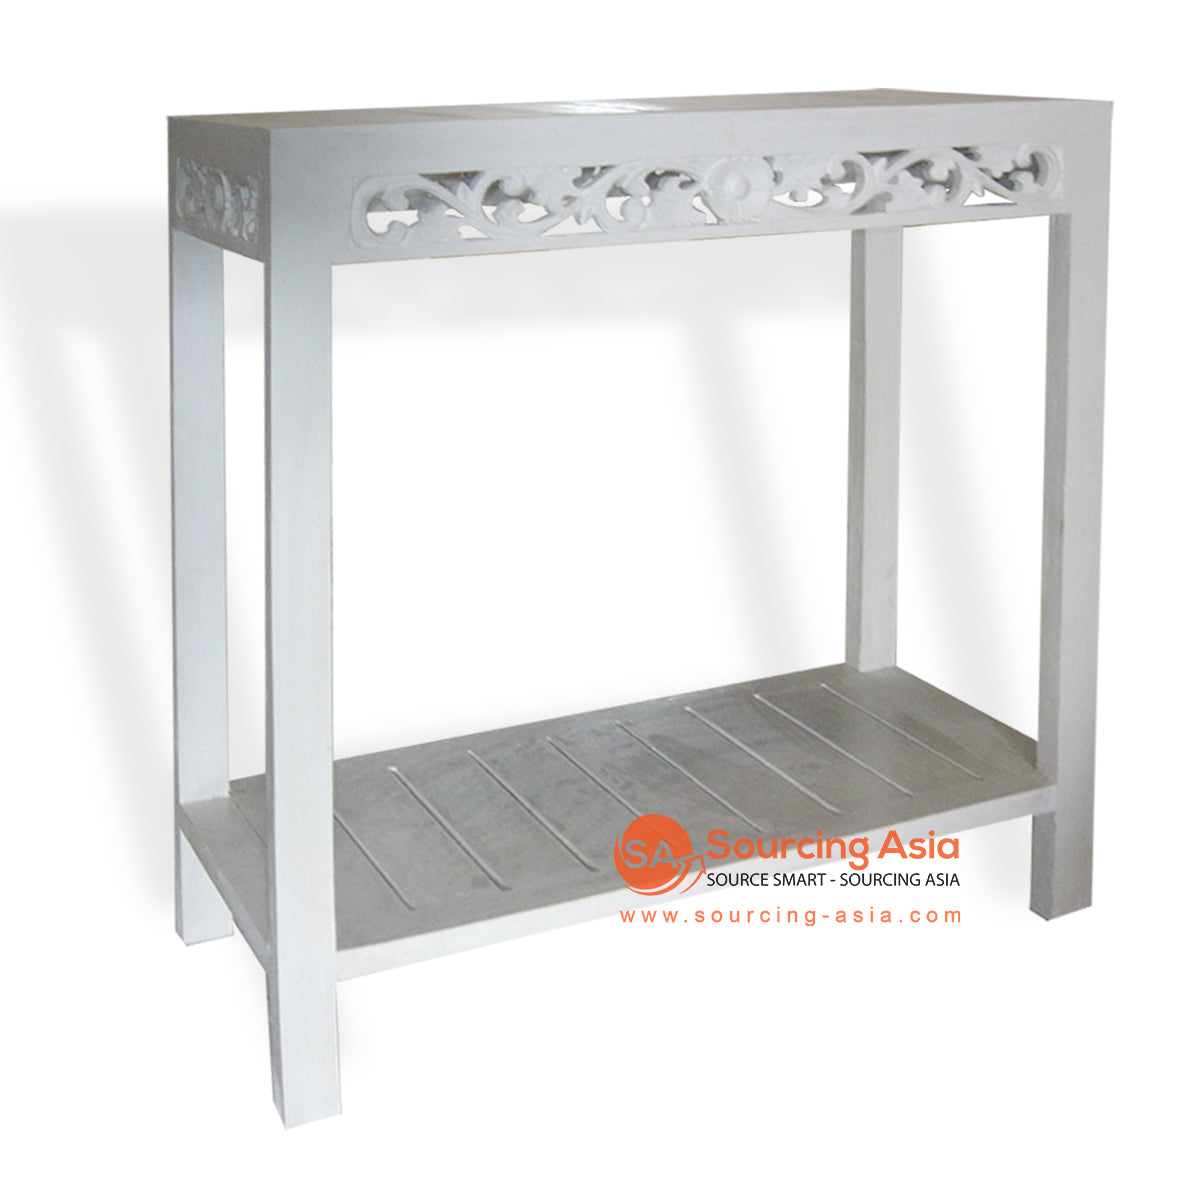 THE014 WHITE WASH WOODEN CONSOLE TABLE WITH CARVING